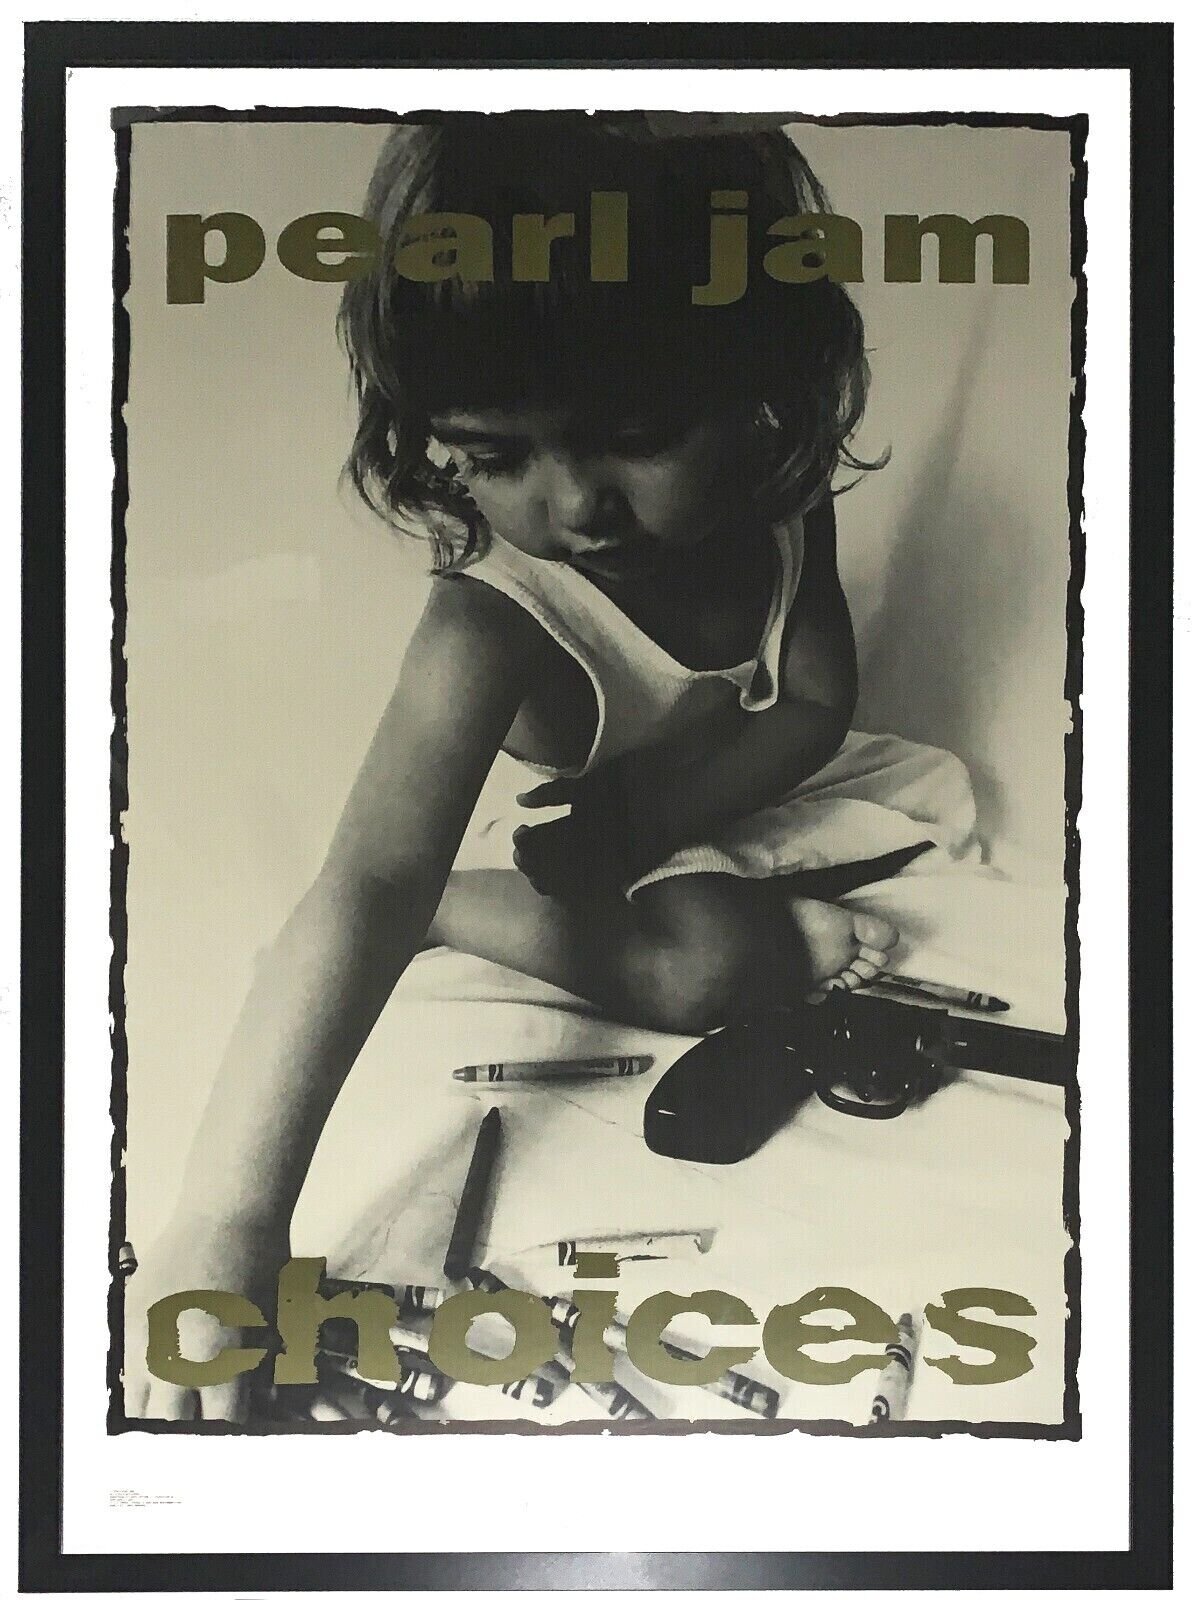 Bleachers Sports Music & Framing — Original Vintage 1992 Pearl Jam ' Choices  ' 42x60 Subway Poster - Professionally Framed